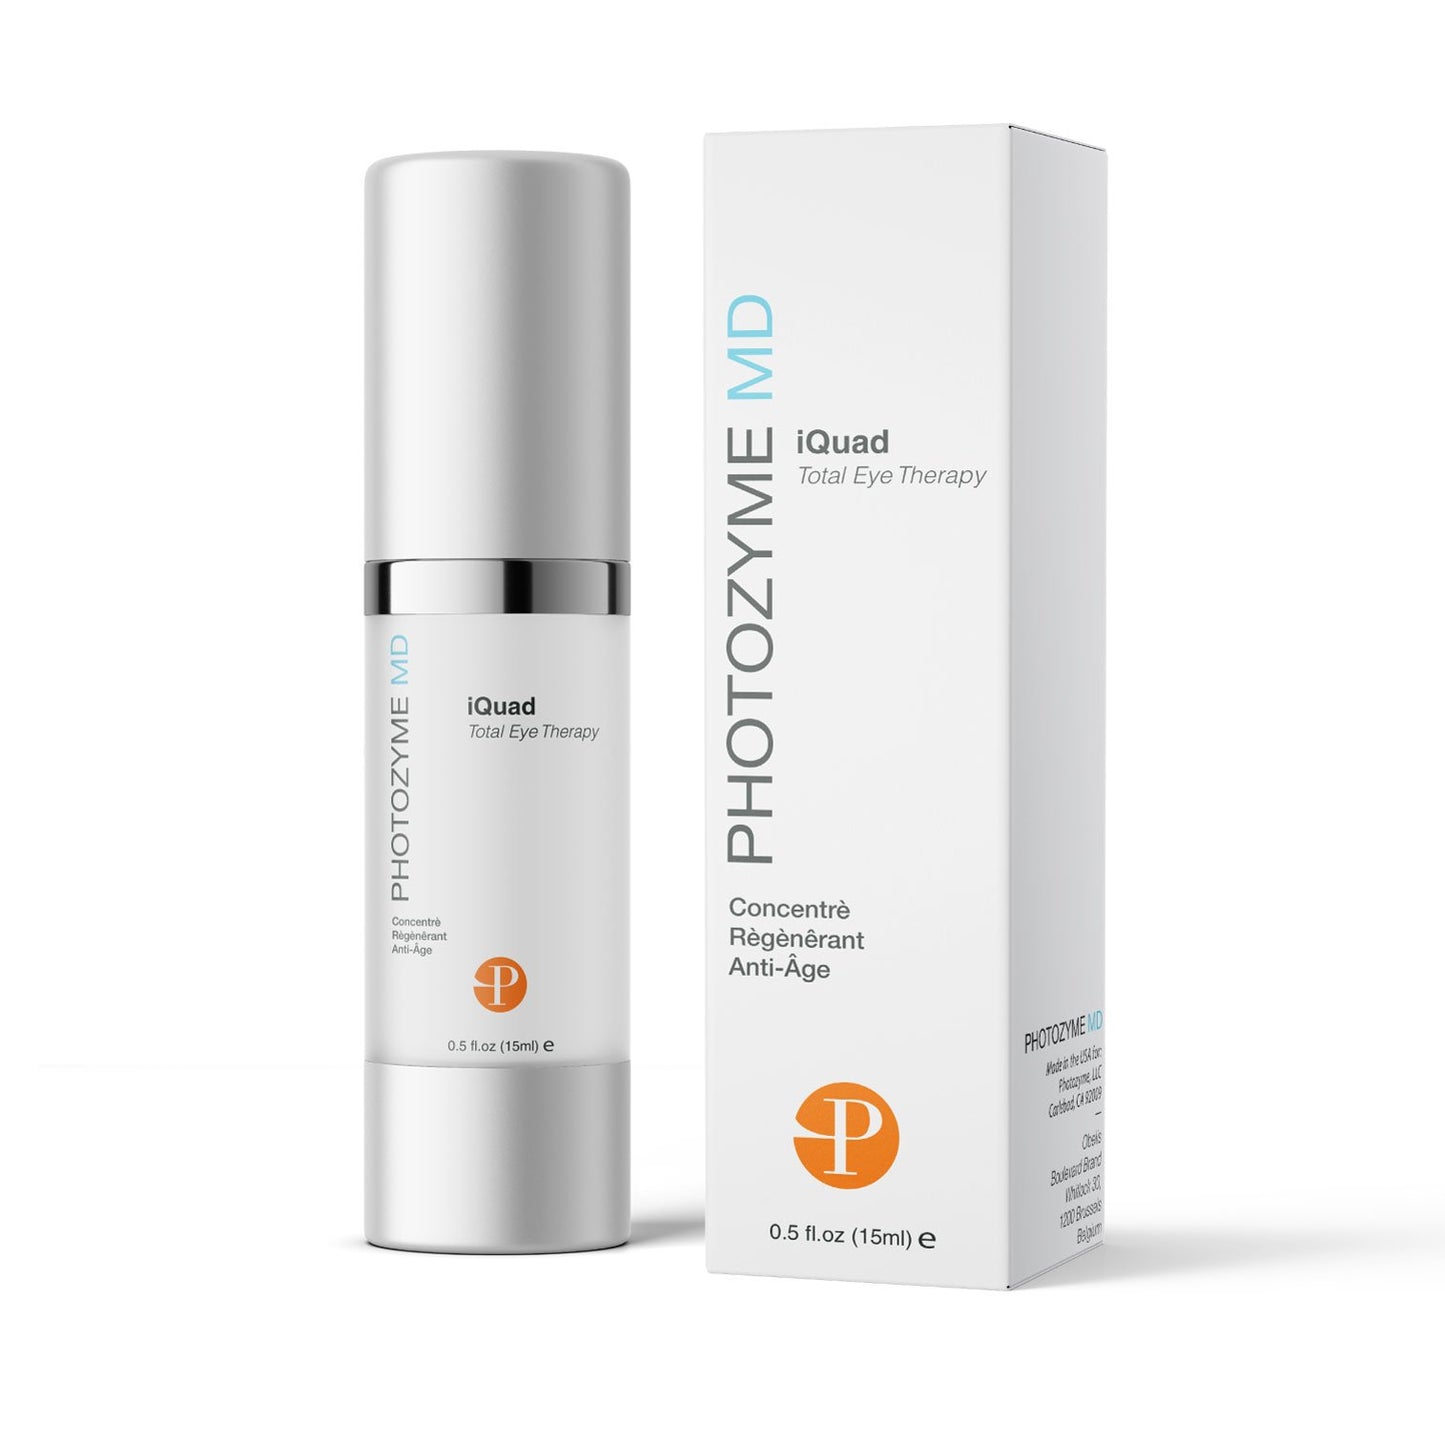 Photozyme iQuad Total Eye Therapy, 15ml